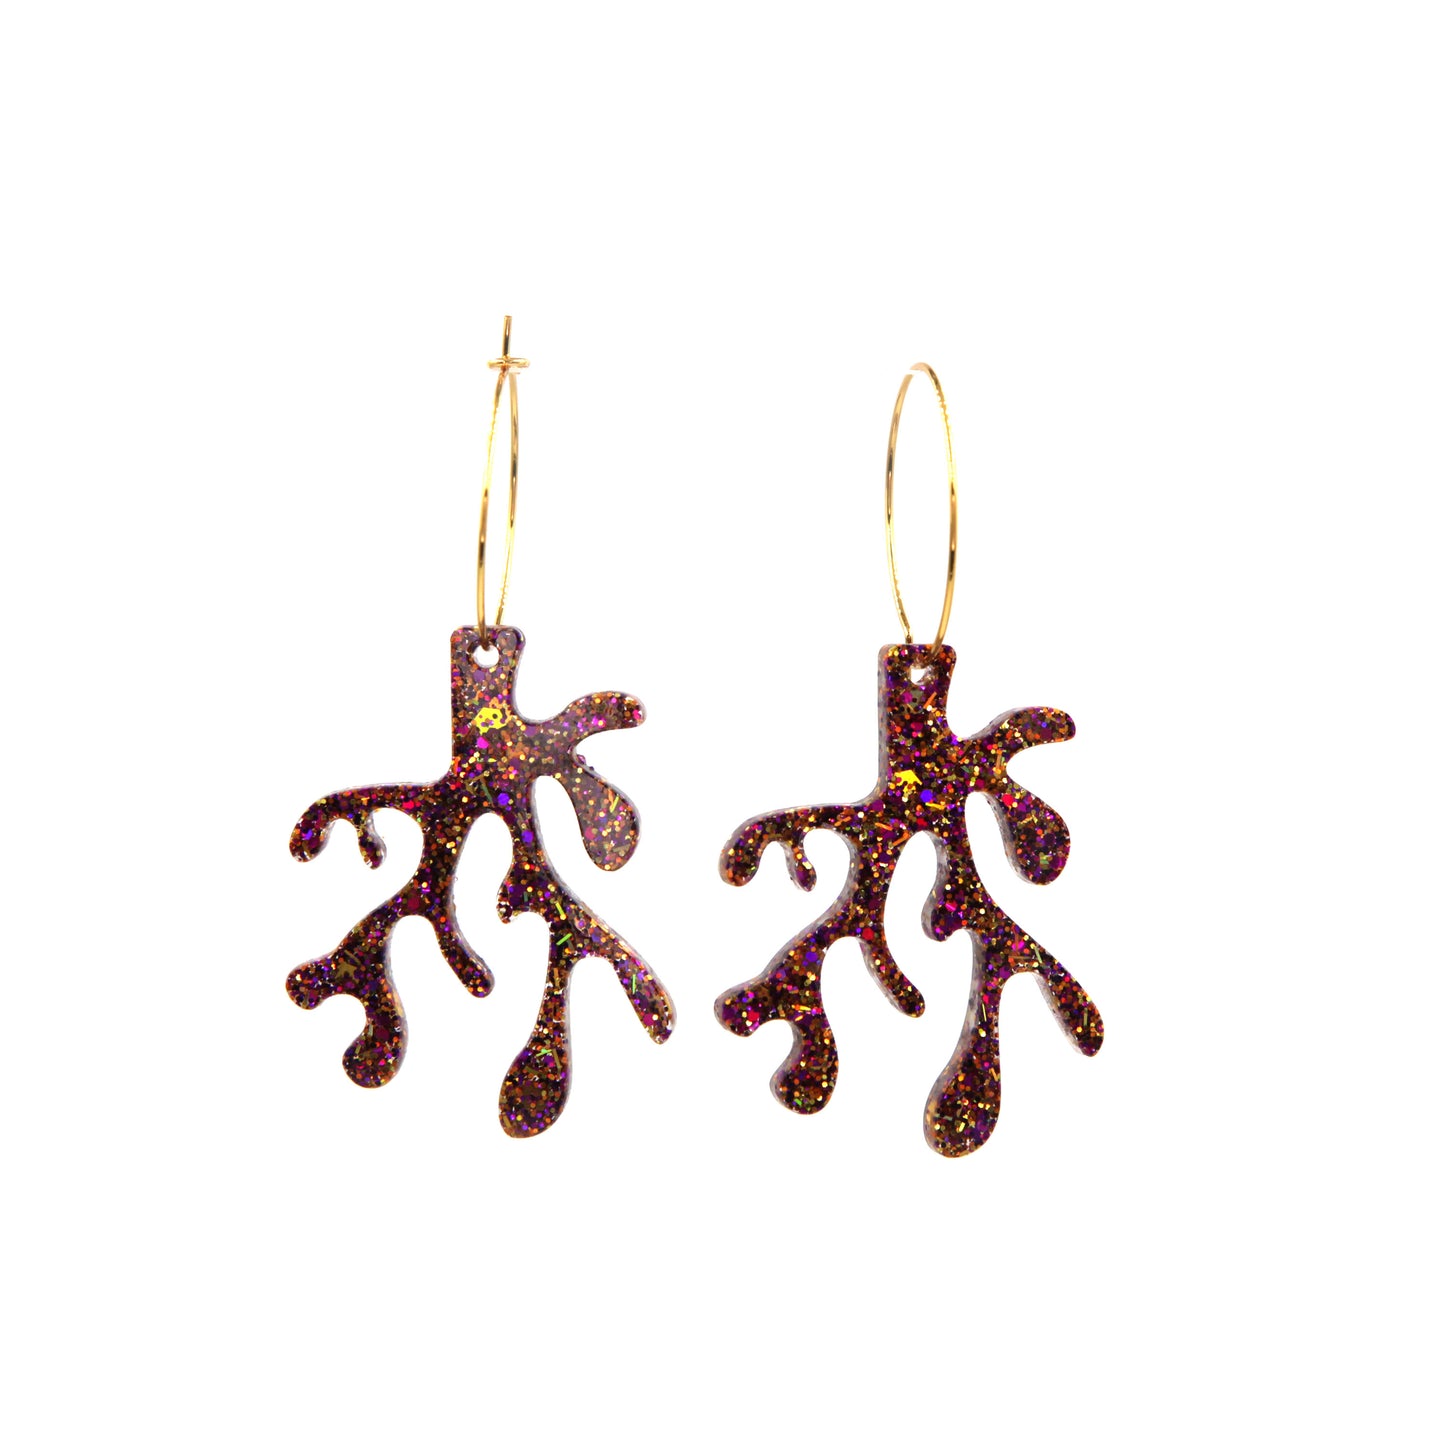 other view of purple glitter resin coral gold plated hoop earrings on a white background